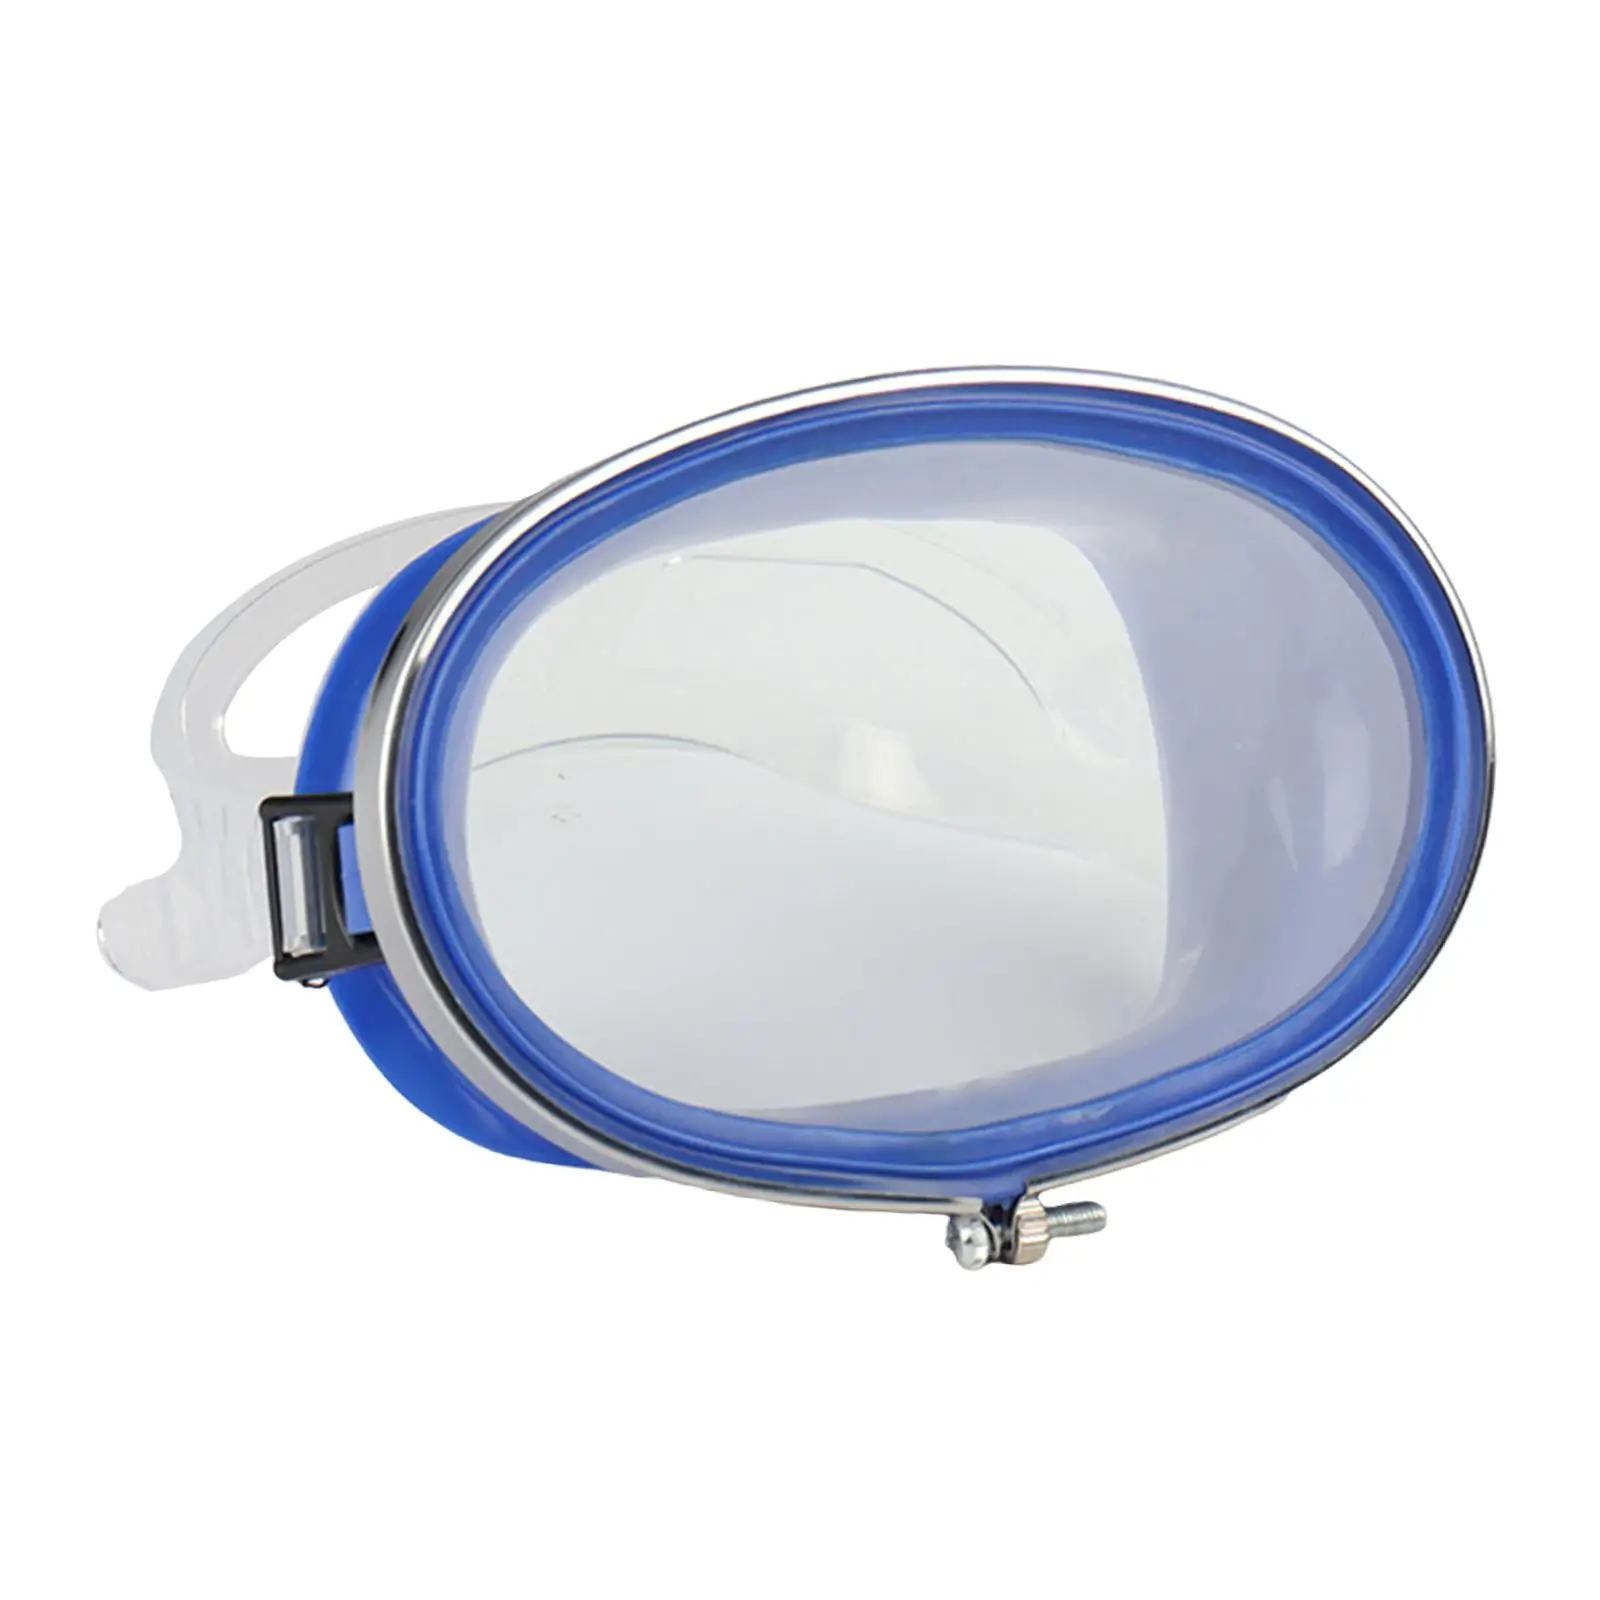 Diving Mask Waterproof Leakproof Tempered Glass Lens Clear Lens Snorkel Mask Swimming Mask Scuba Diving Goggles